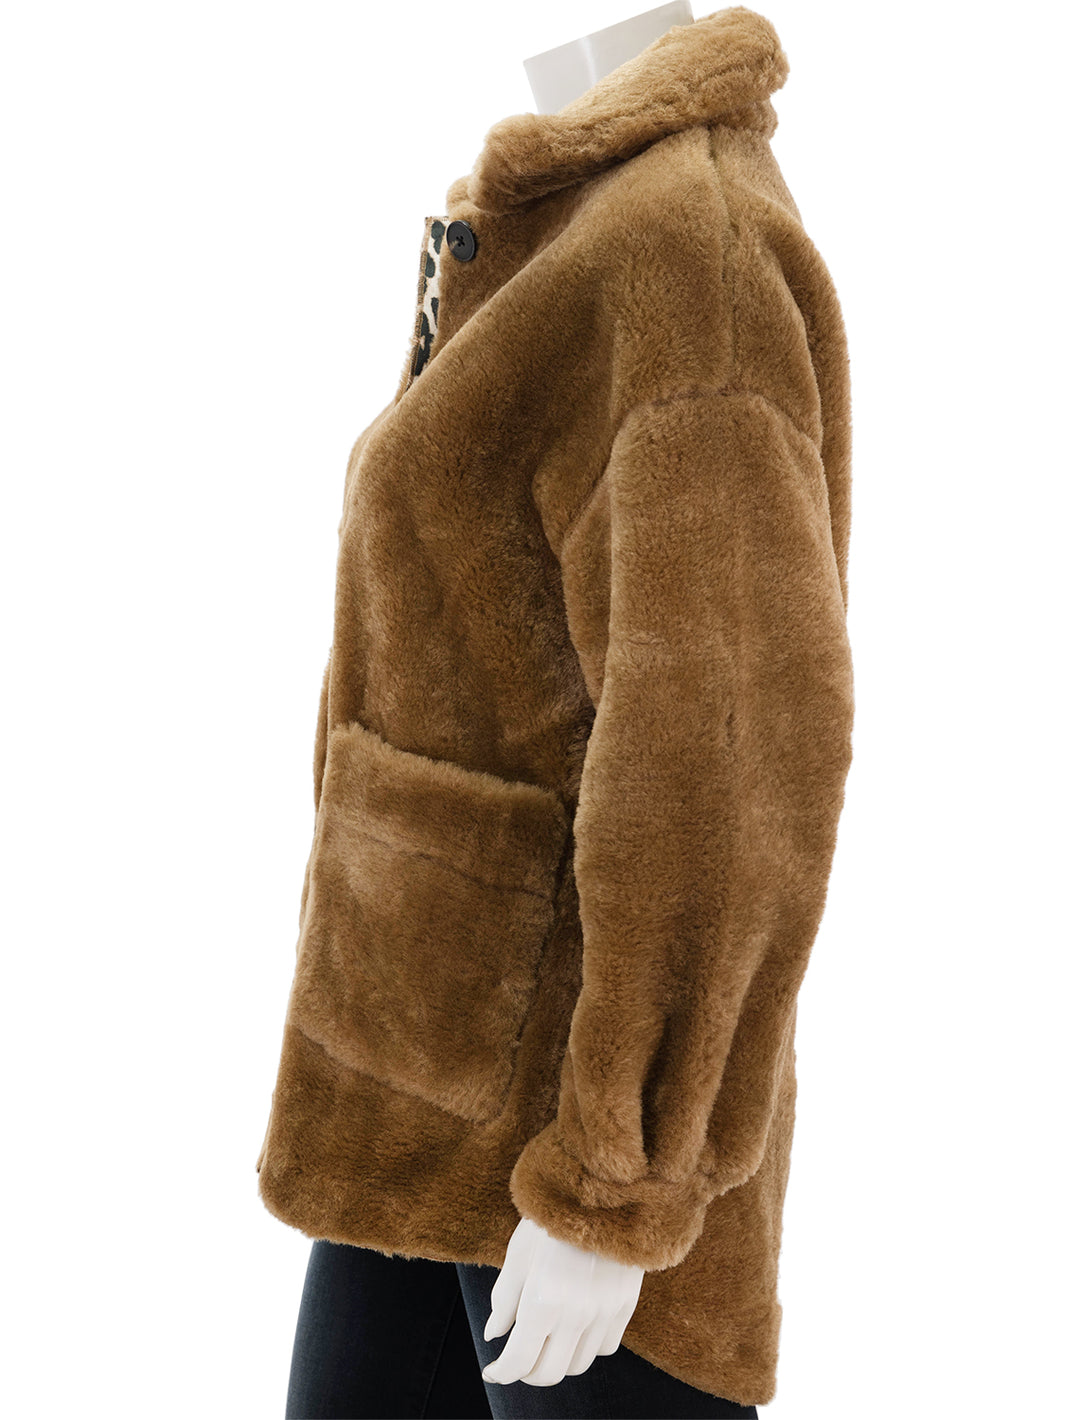 Side view of Suncoo Paris' Everest Reversible Coat in Camel.